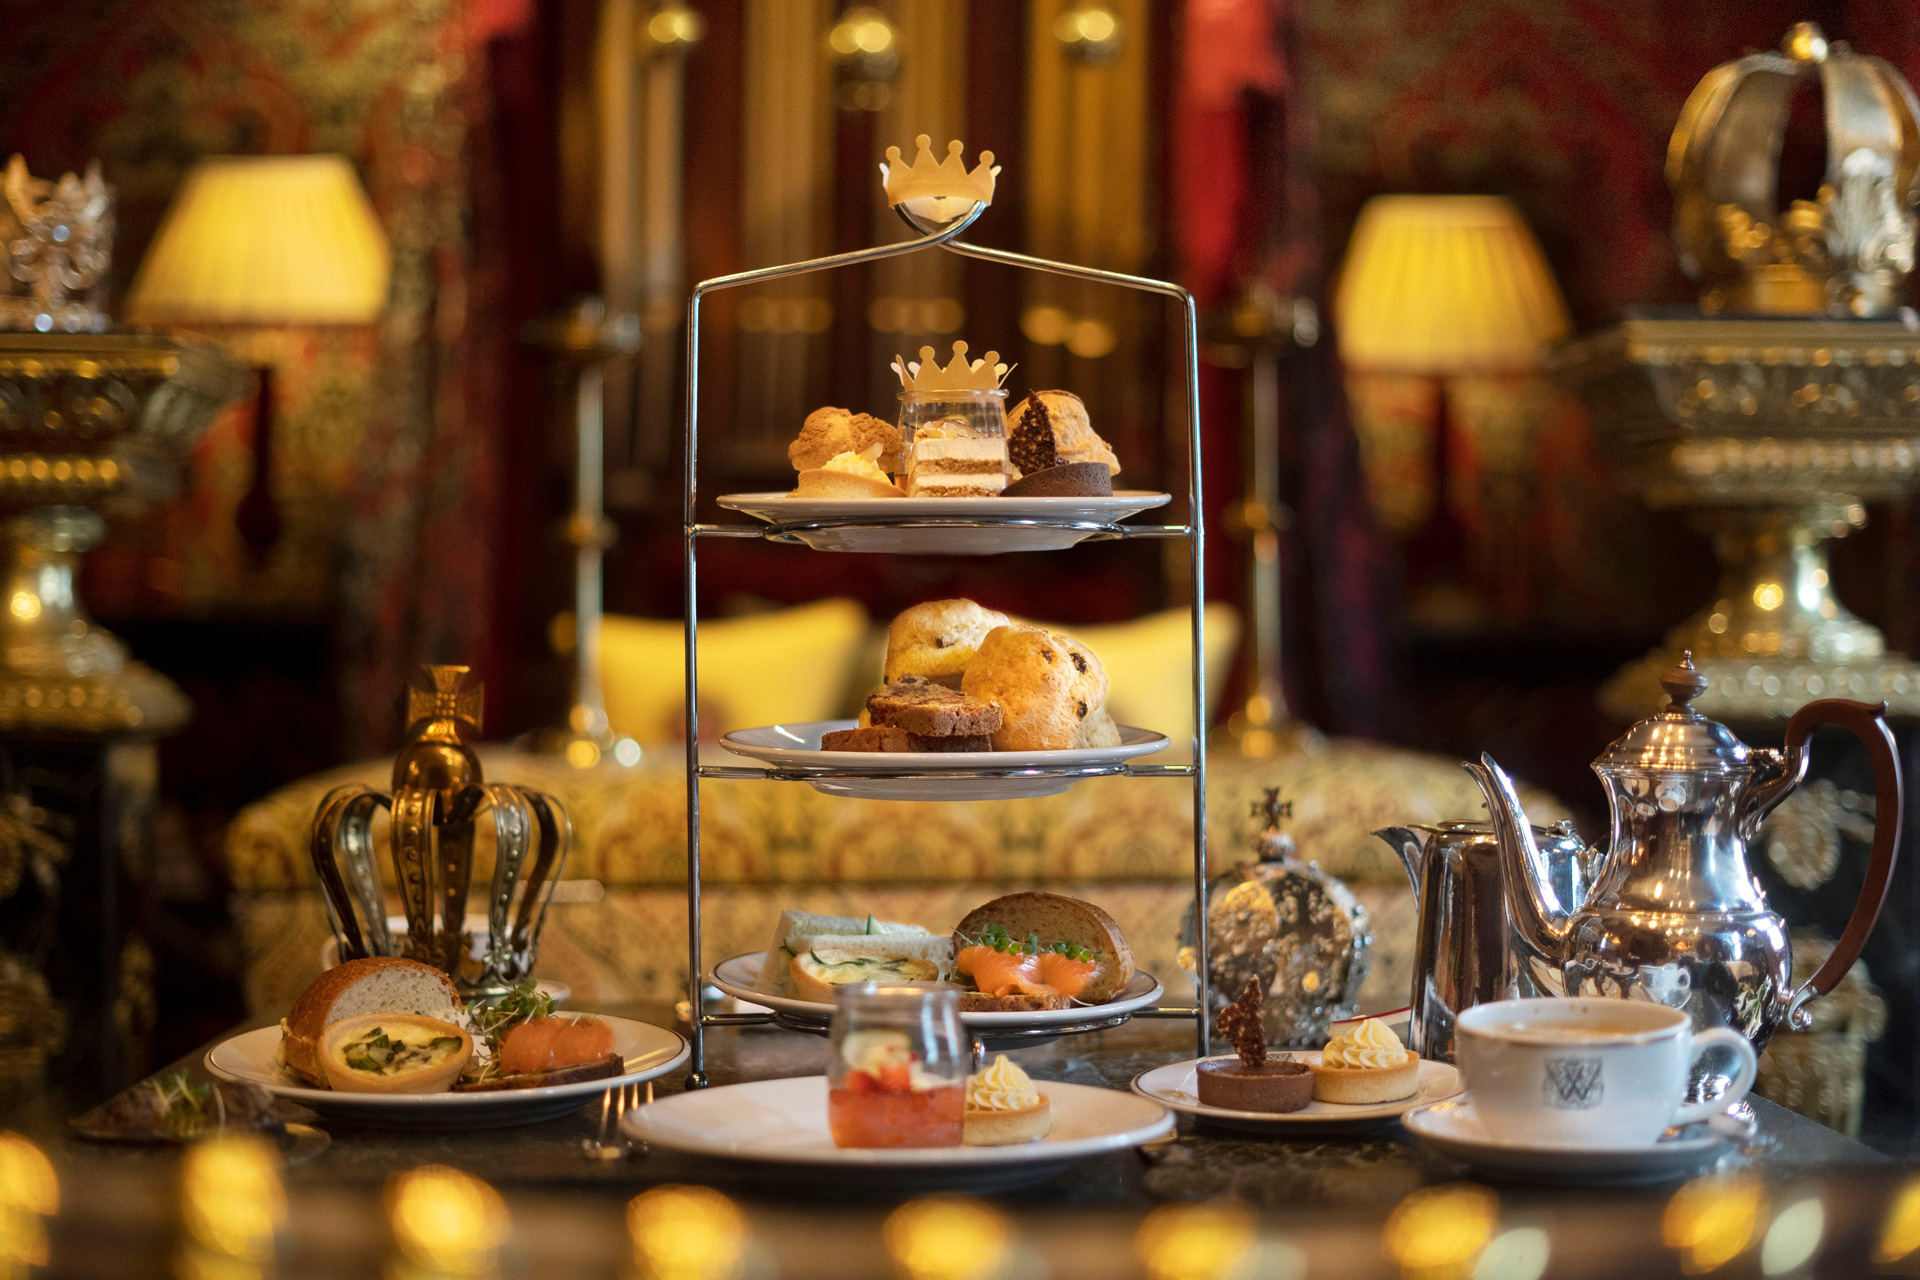 Afternoon tea at The Witchery in Edinburgh